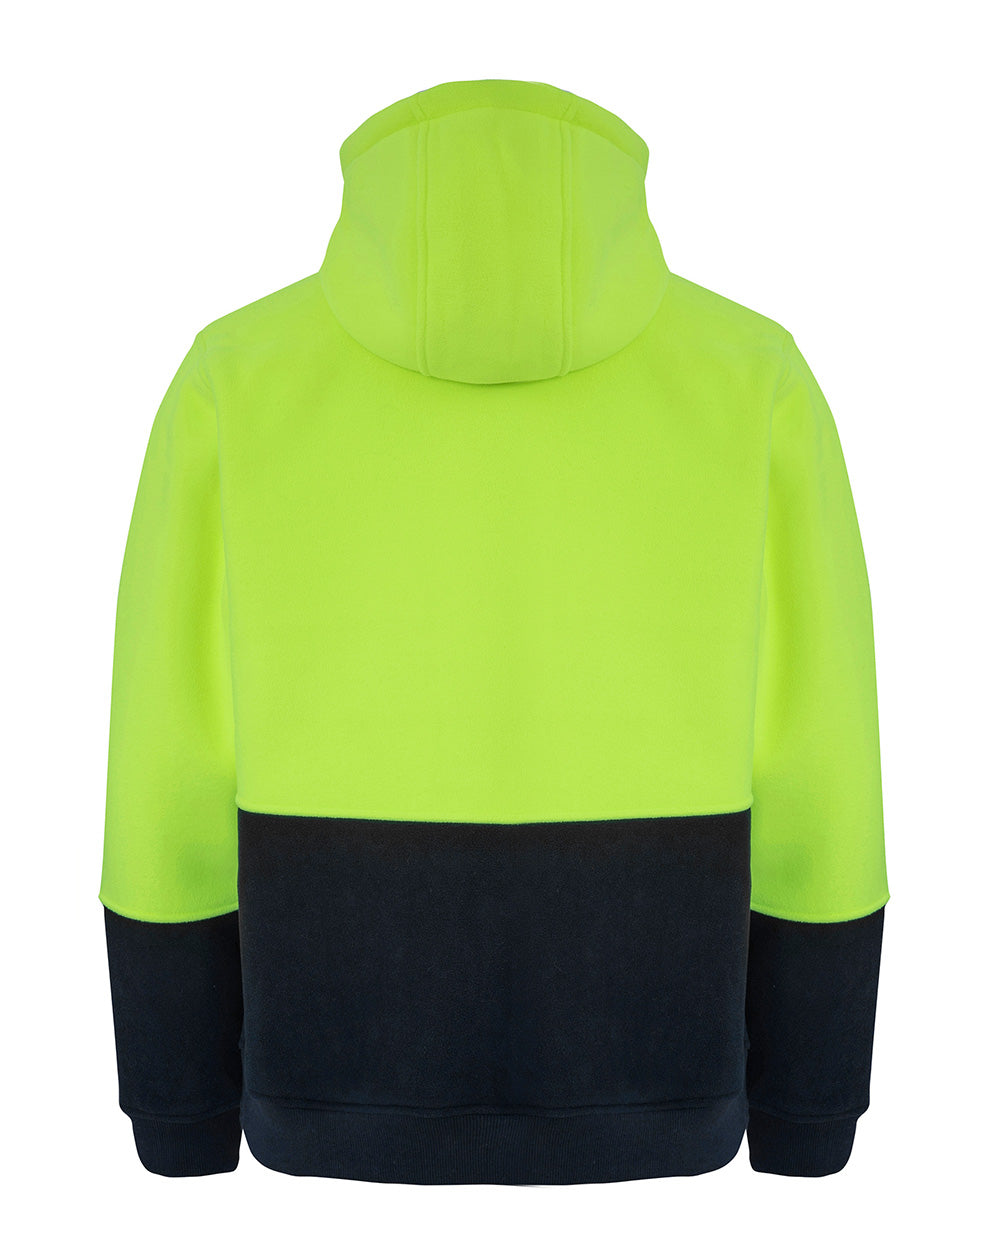 Taylor Hoodie in Fluoro Yellow & Navy